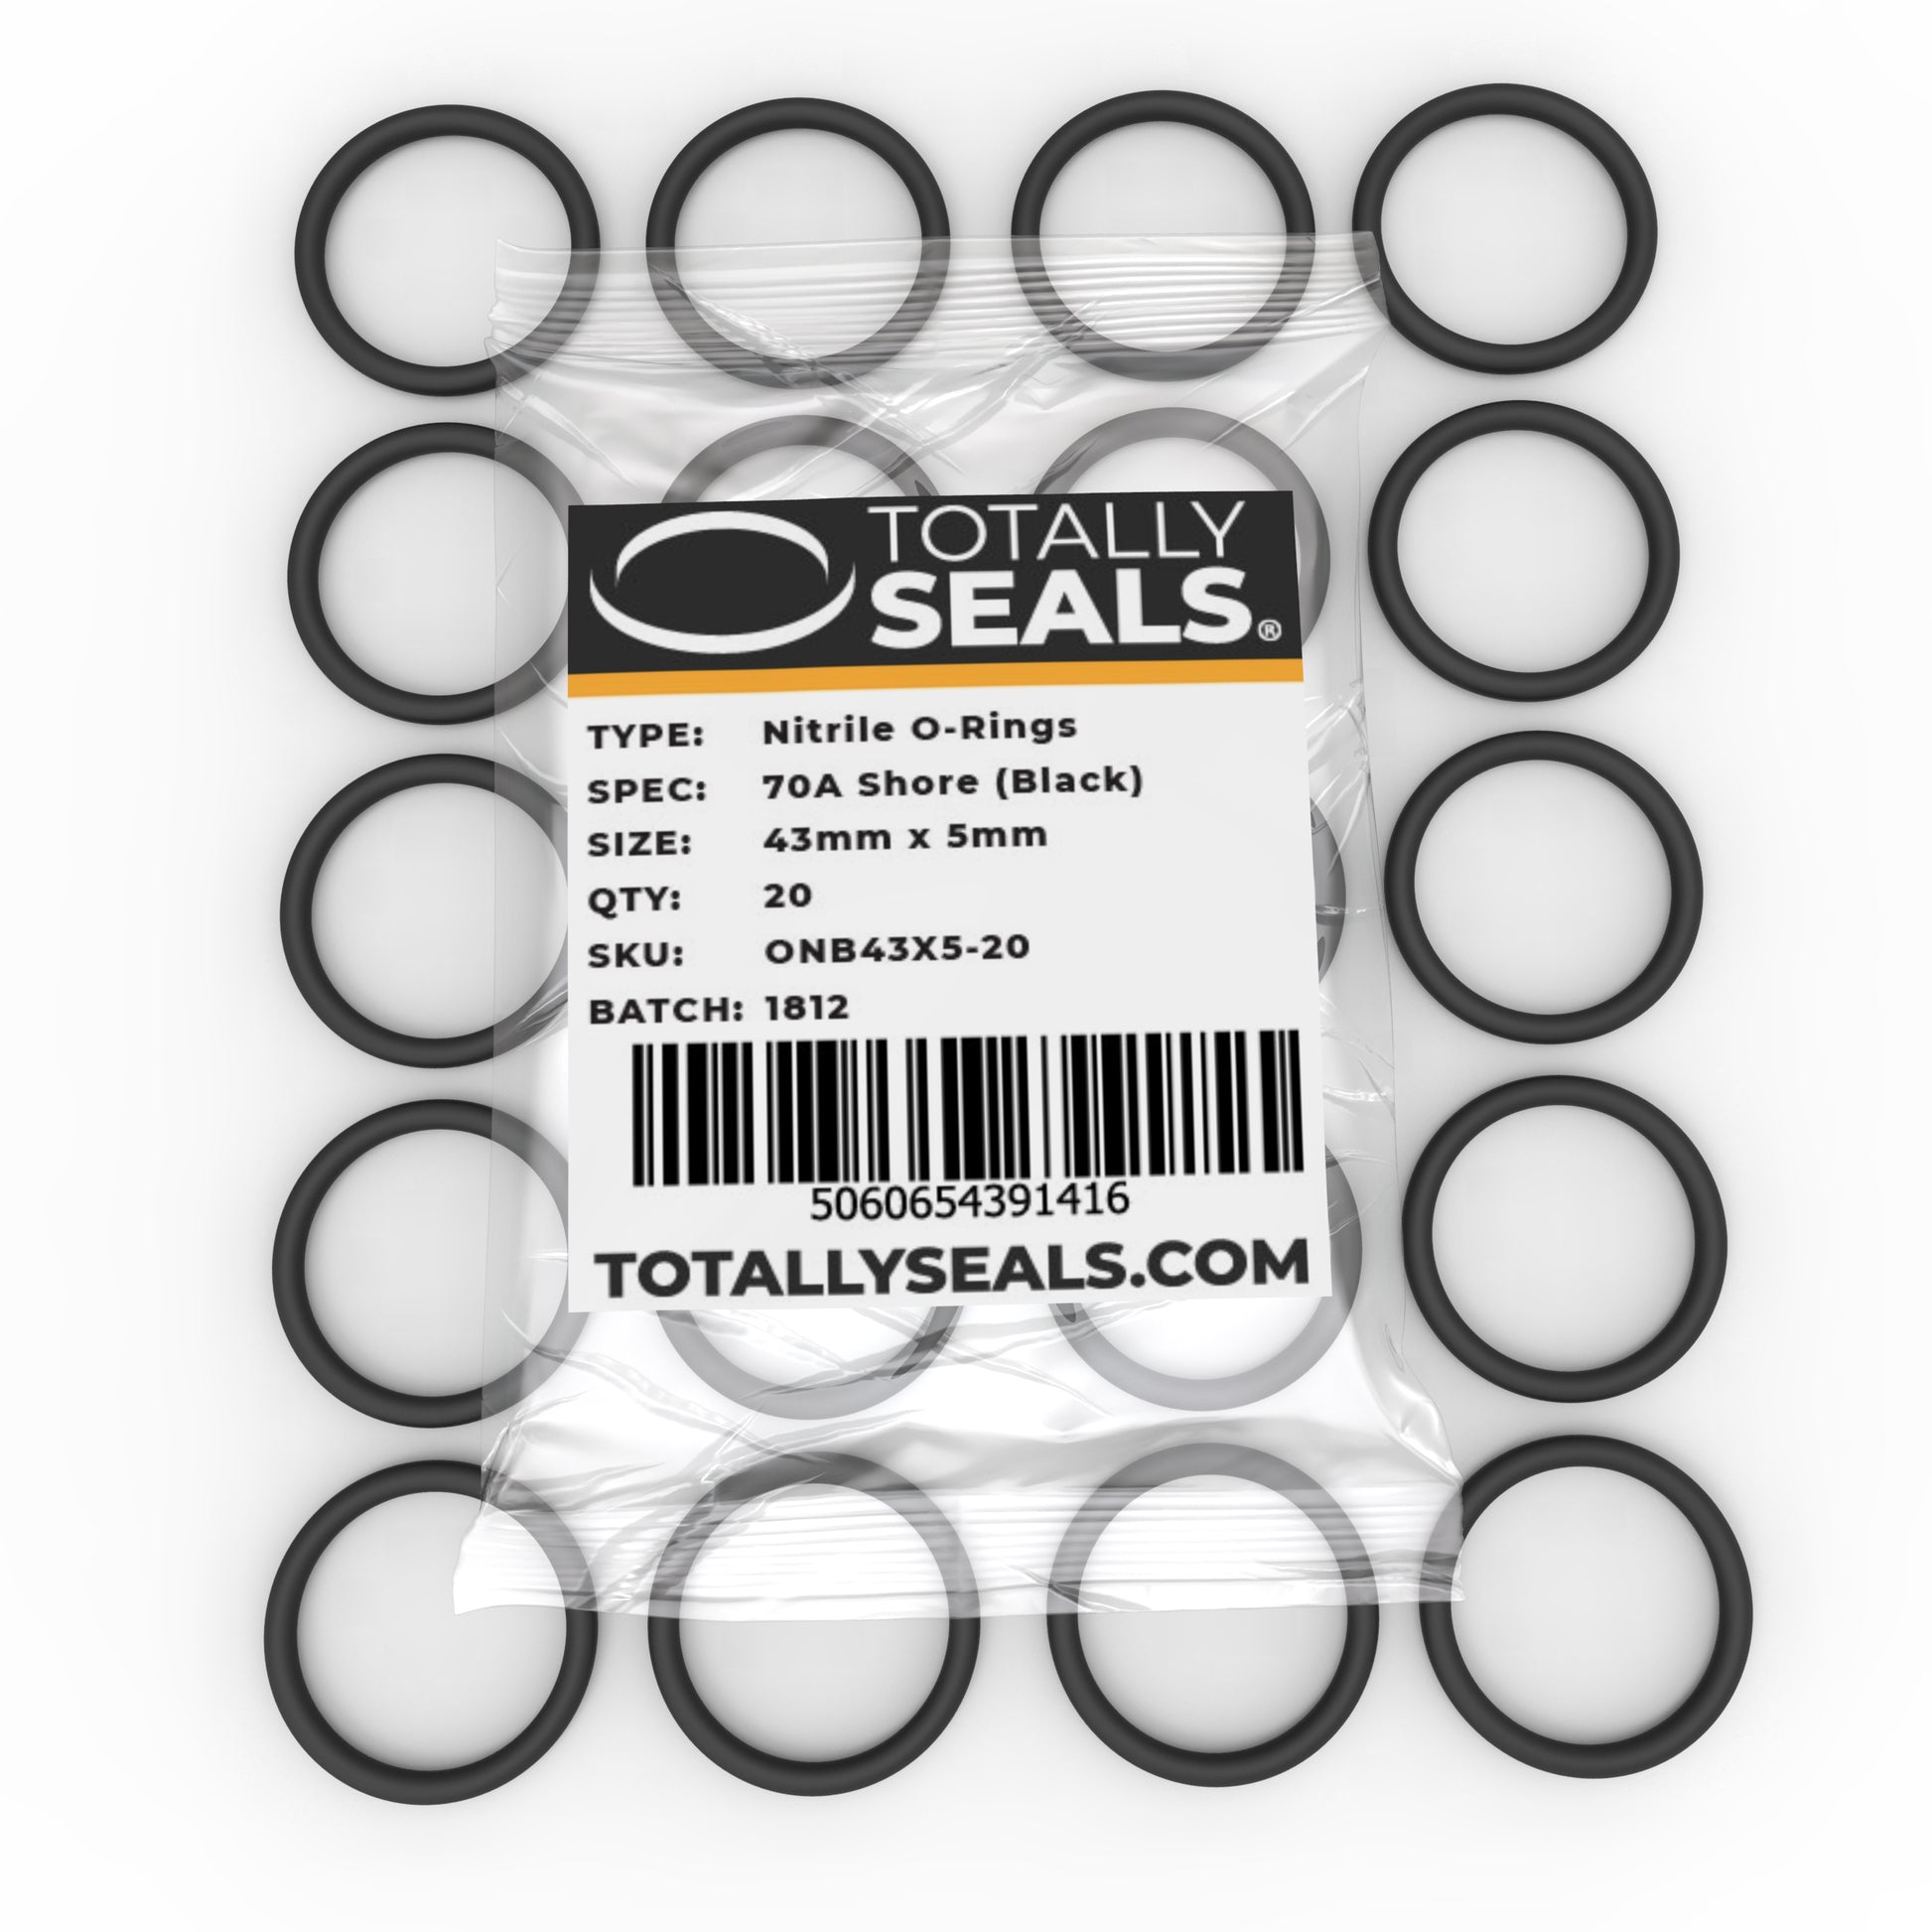 43mm x 5mm (53mm OD) Nitrile O-Rings - Totally Seals®